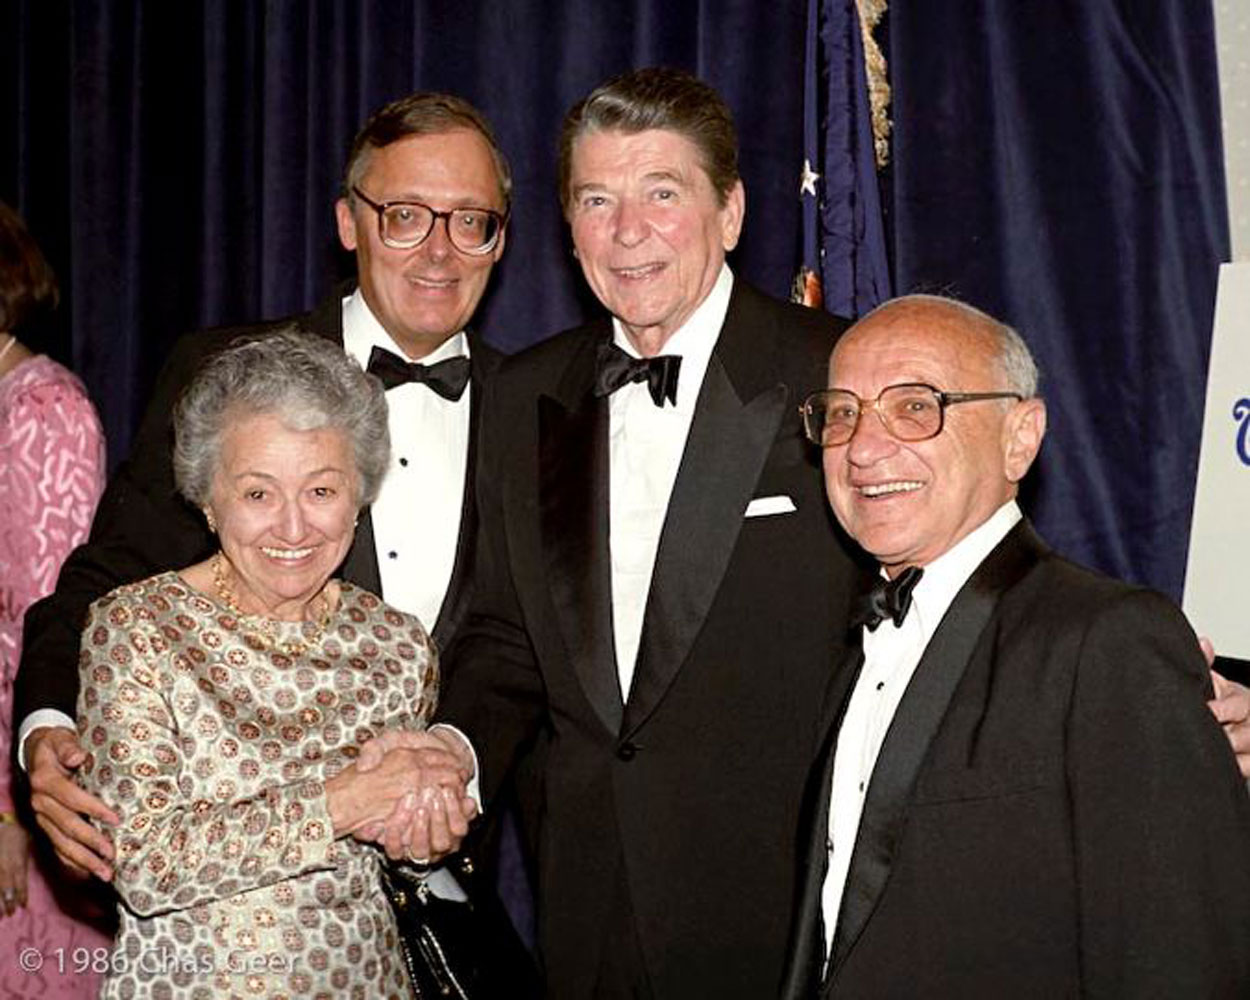 Ed Feulner and President Ronald Reagan are flanked by Rose and Milton Friedman in 1986. (Photo: Charles Geer for The Heritage Foundation)